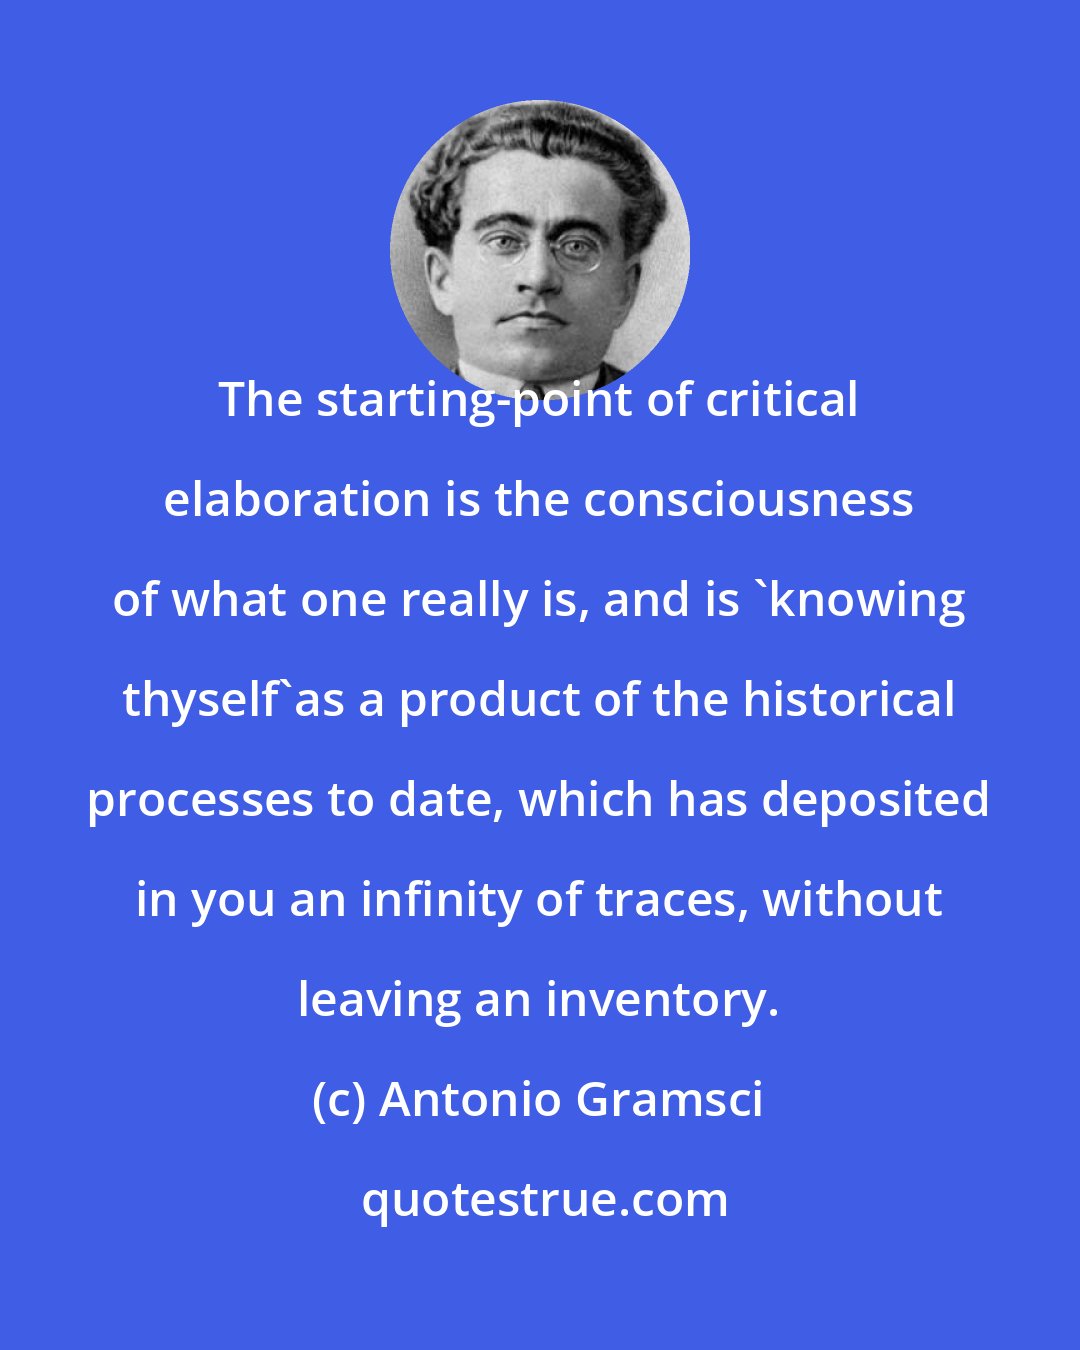 Antonio Gramsci: The starting-point of critical elaboration is the consciousness of what one really is, and is 'knowing thyself'as a product of the historical processes to date, which has deposited in you an infinity of traces, without leaving an inventory.